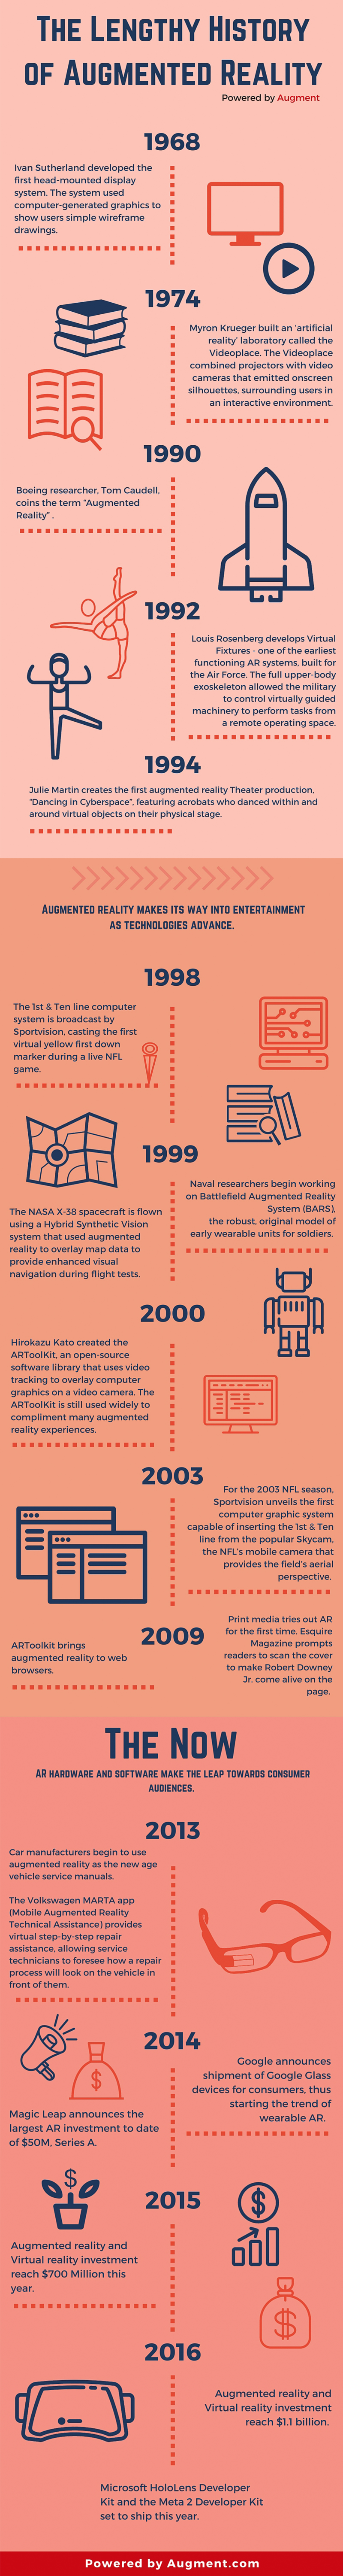 The History of Augmented Reality